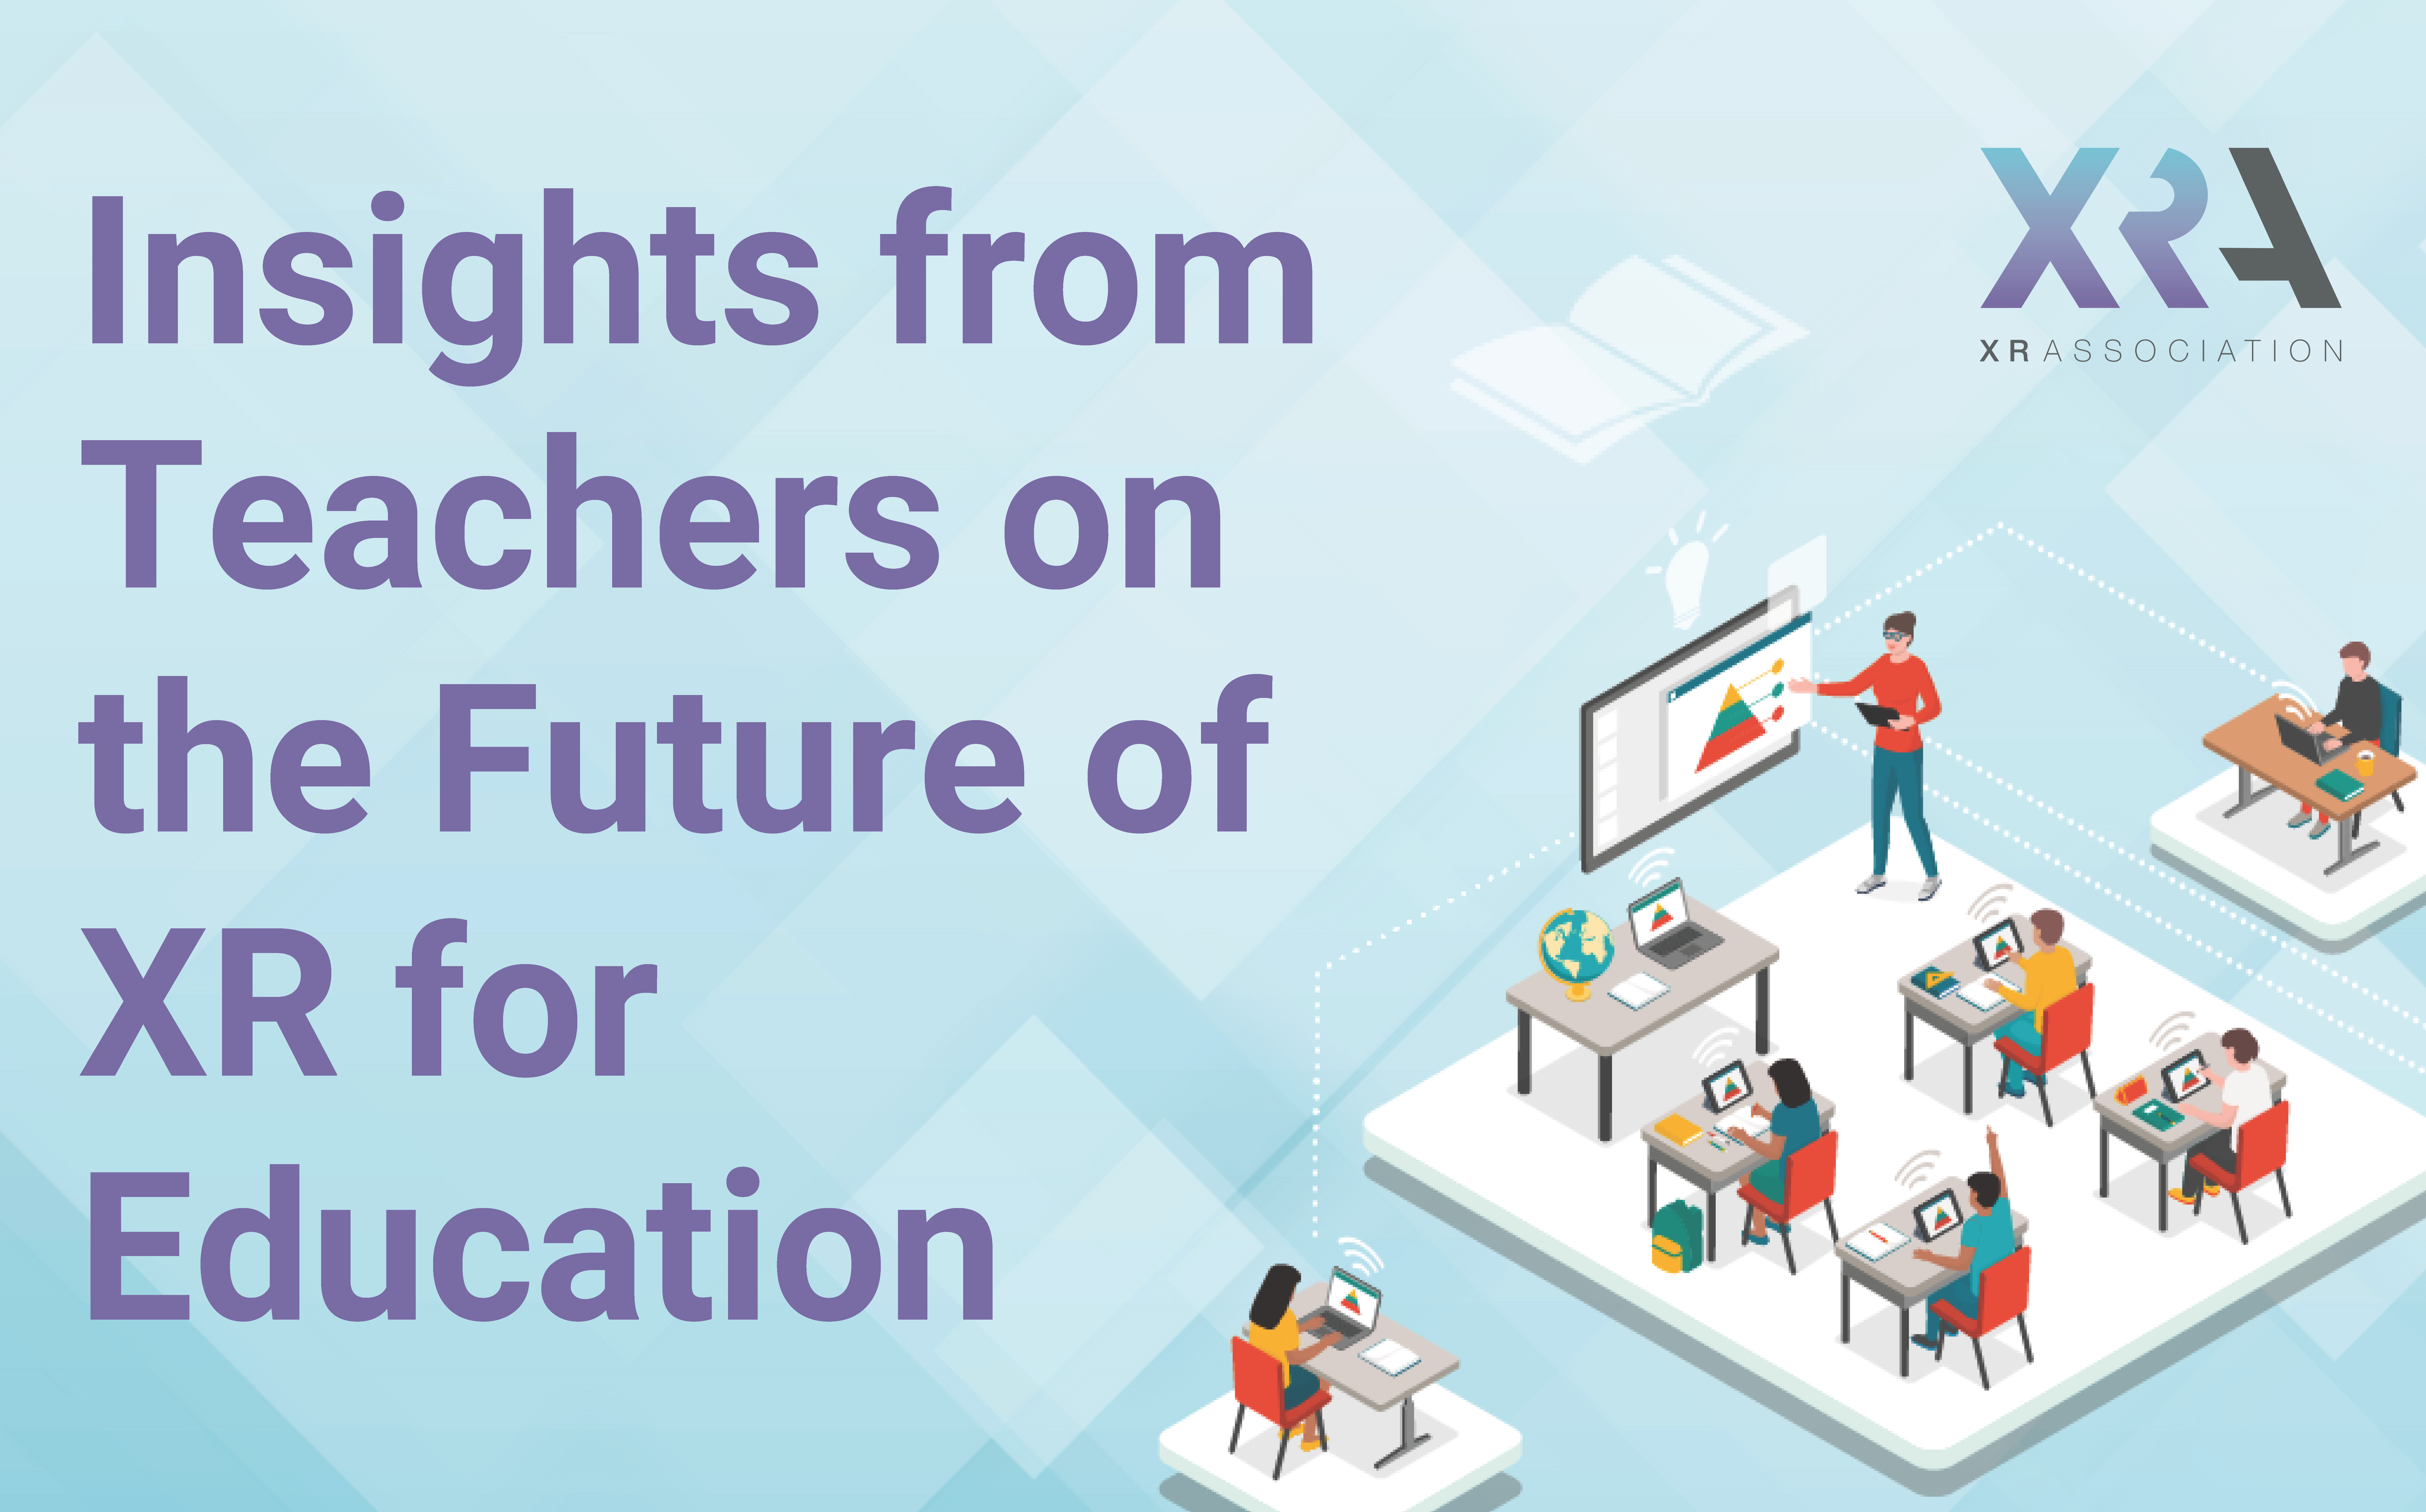 INSIGHTS FROM TEACHERS ON THE FUTURE OF XR FOR EDUCATION